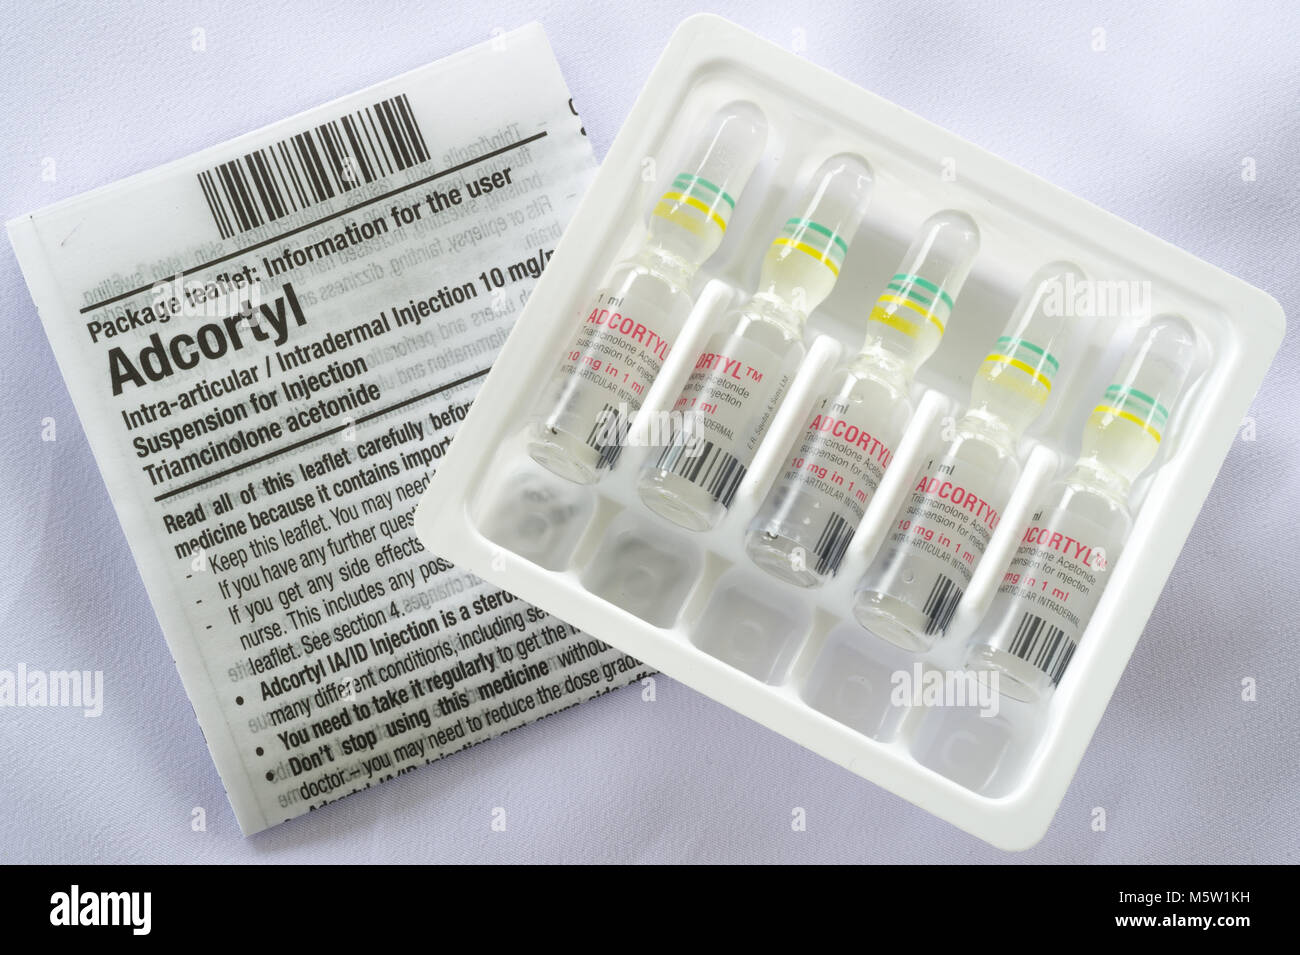 Adcortyl Intra-articular / Intradermal Injection isolated on a white background with information leaflet. THIS IS A PICTURE, NOT THE PRODUCT. Stock Photo